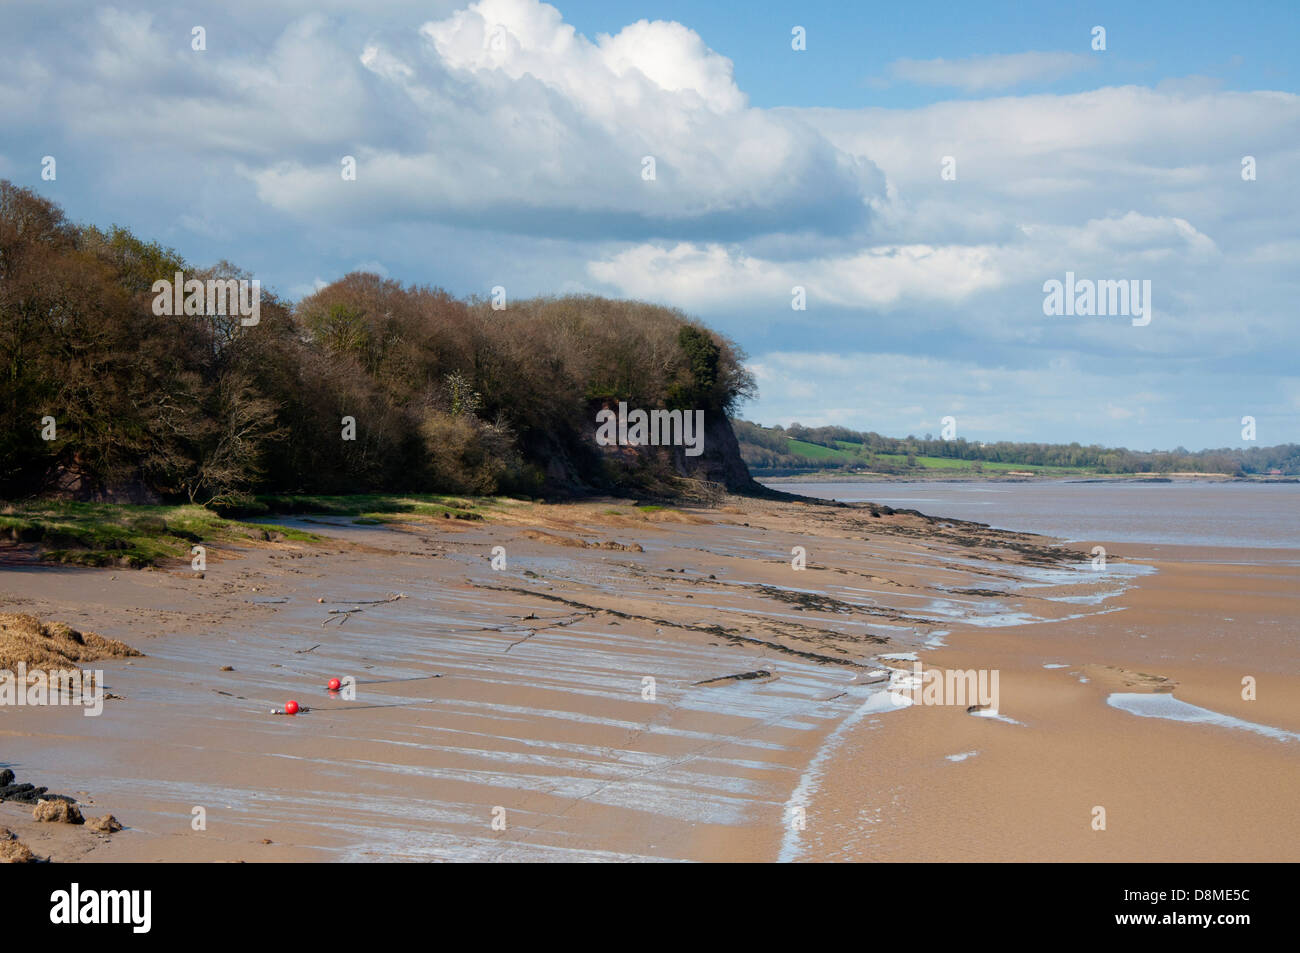 River Severn, flood defences, rocks, boulders, bank, mud, lichen, skyscape, blue sky, white and gray clouds, shrubs, trees Stock Photo